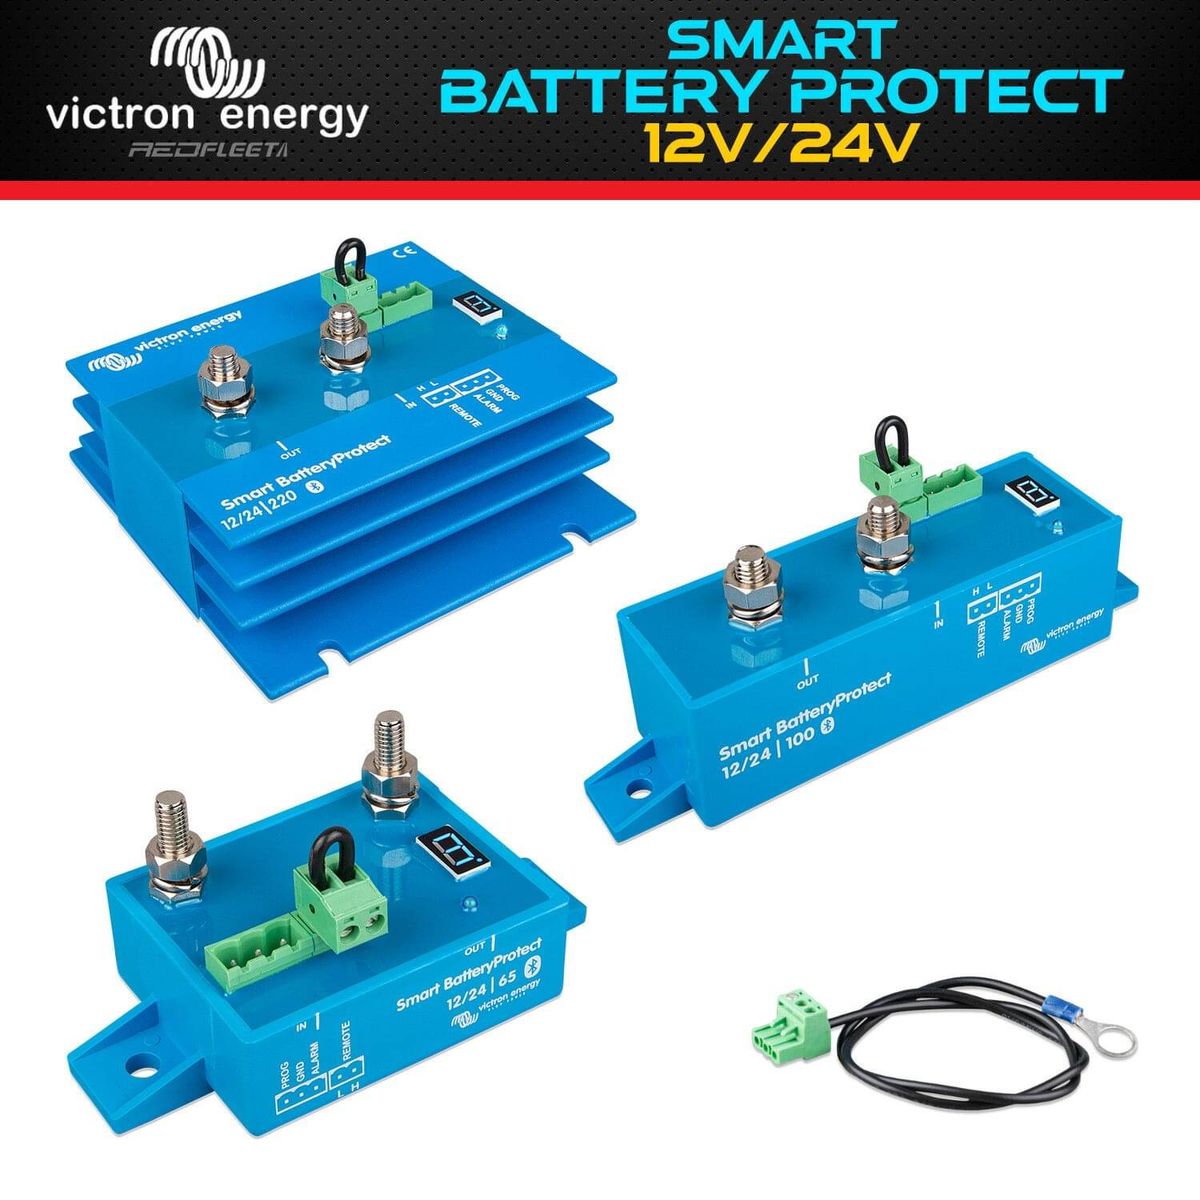 REDFLEET  VICTRON SMART BATTERY PROTECT 12V/24V 65A Low Voltage Load  Disconnect with Bluetooth, Power Management Systems